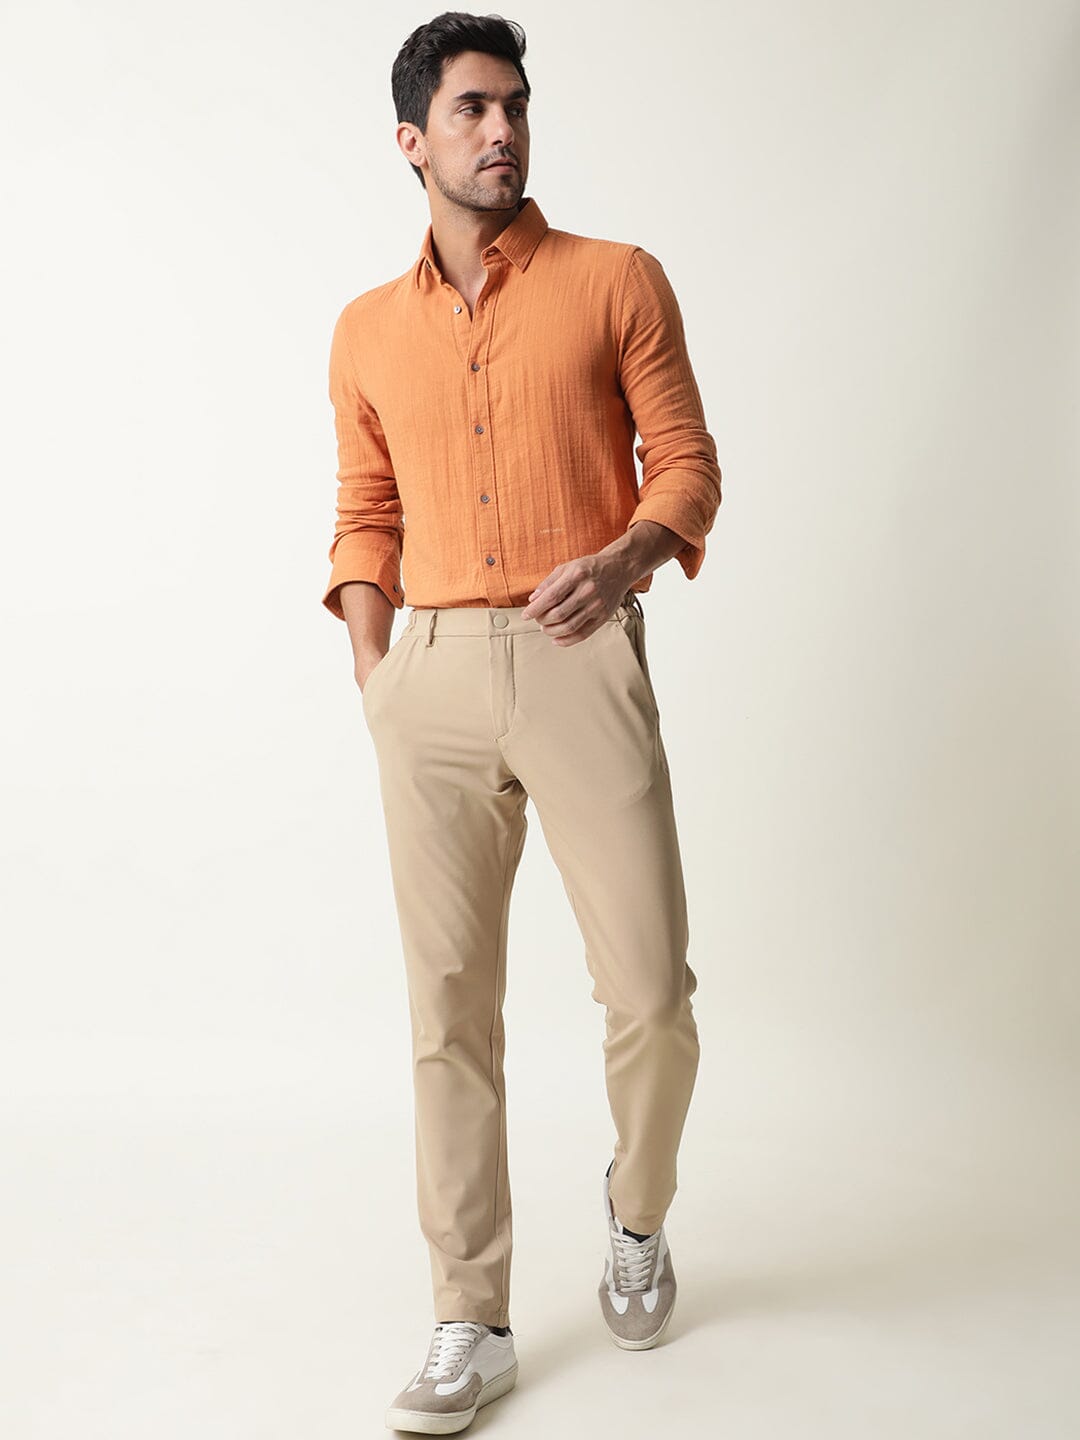 What is an appropriate beige top outfit for men? - Quora